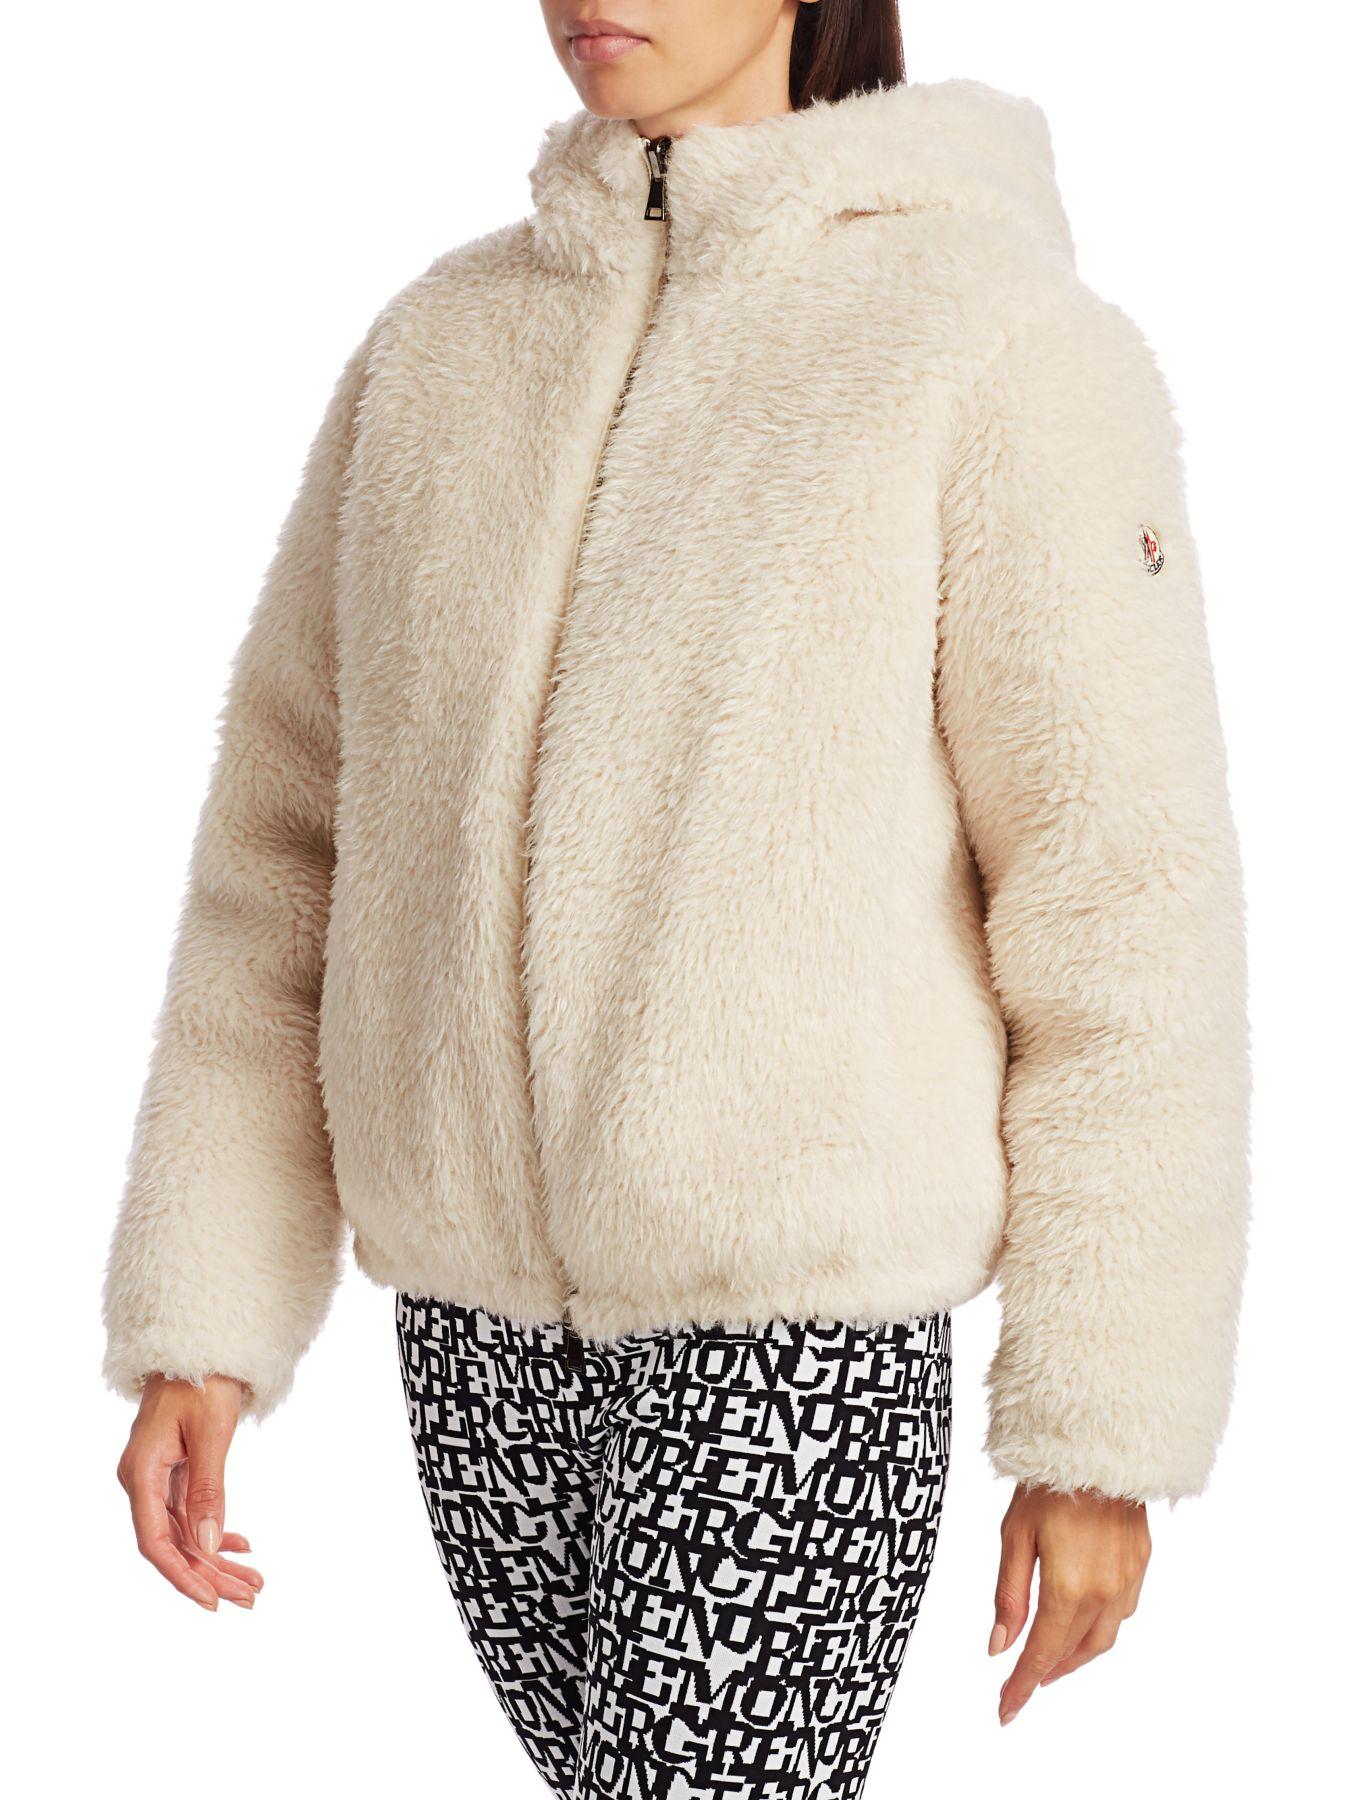 Moncler Synthetic Kolima Reversible Faux Fur Teddy Jacket in Natural - Lyst